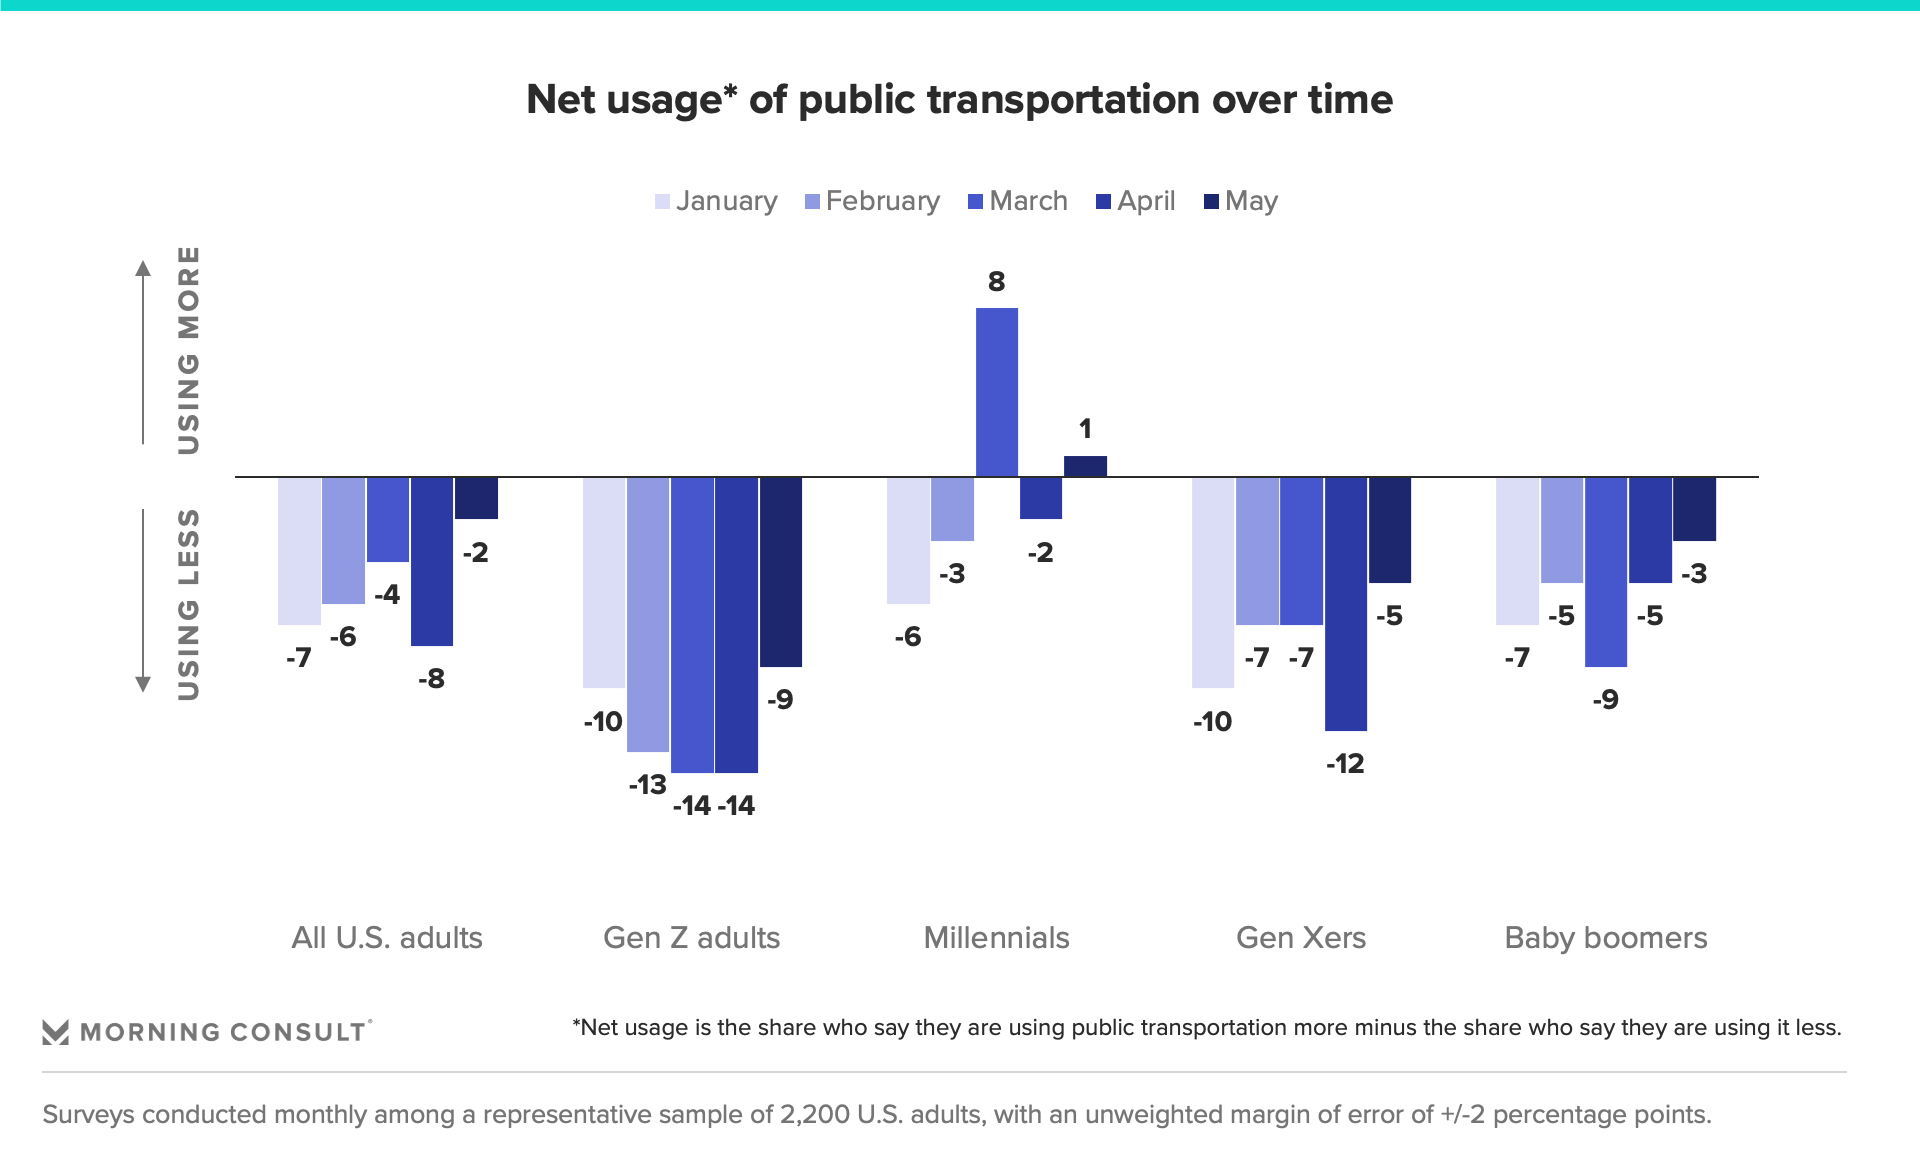 Chart conveying net usage of public transportation over time